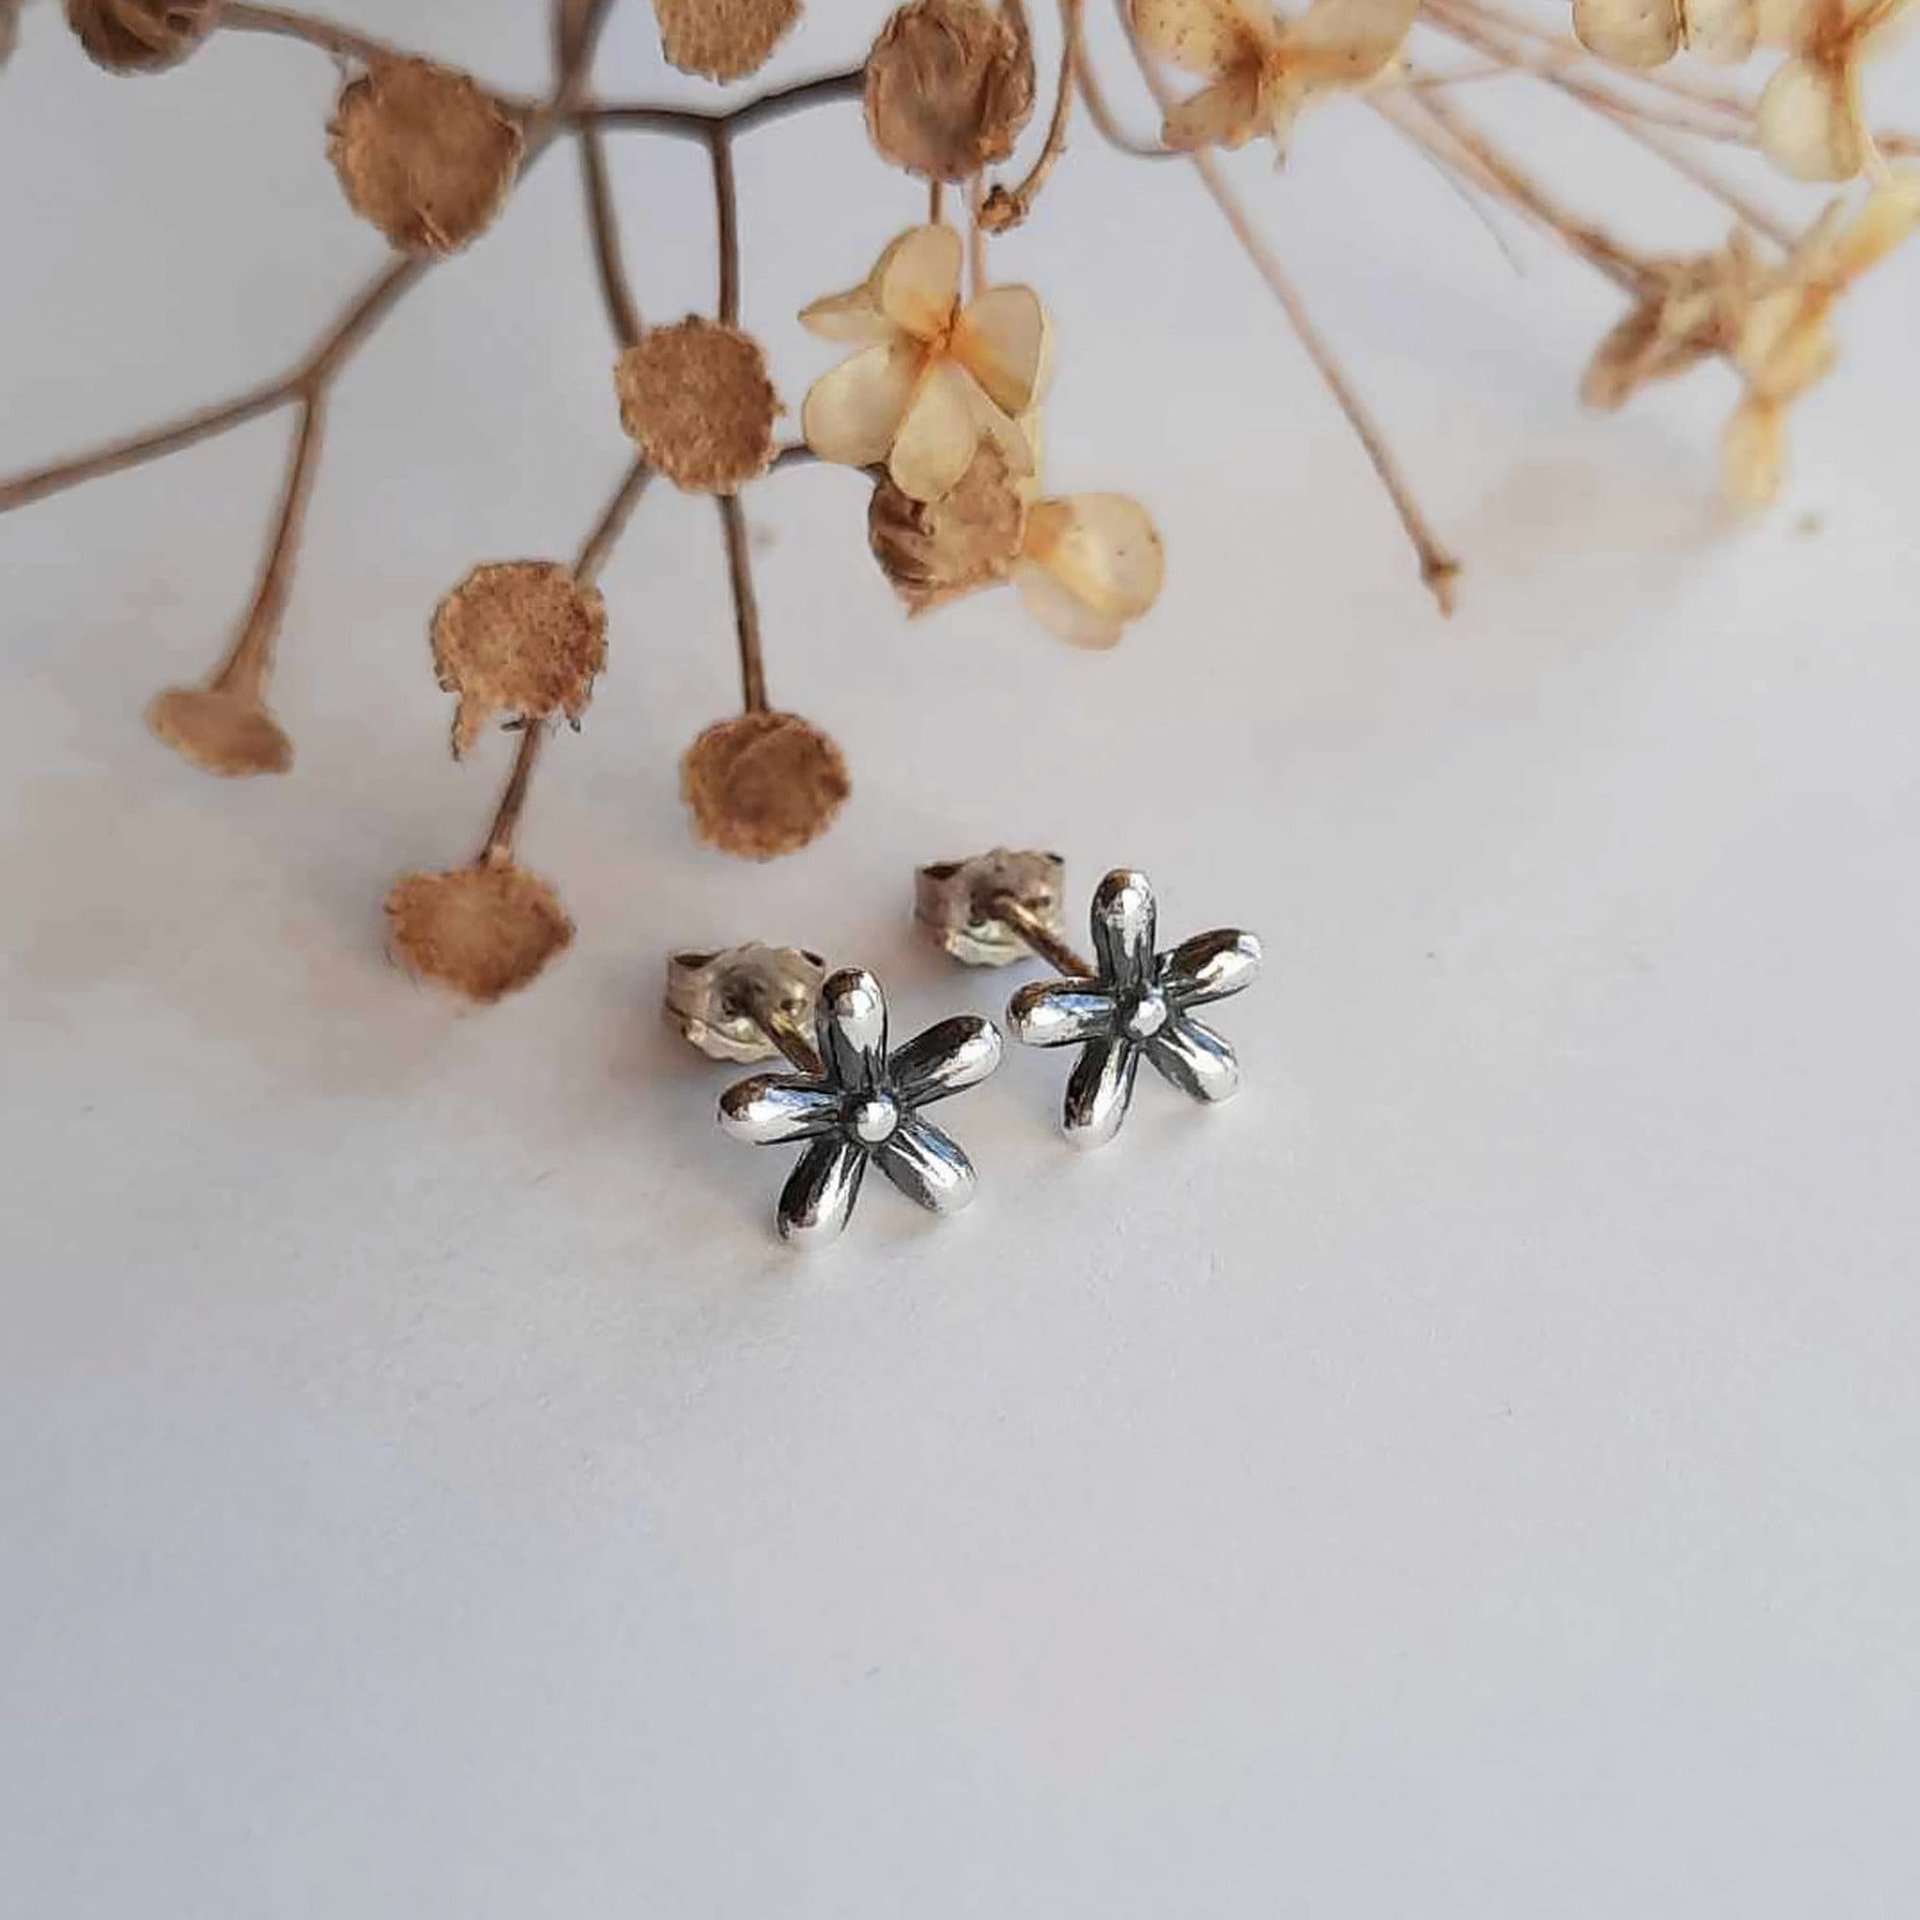 Oxidised Fine Silver Flower Stud Earrings ~ Artisan Made by The Tiny Tree Frog Jewellery